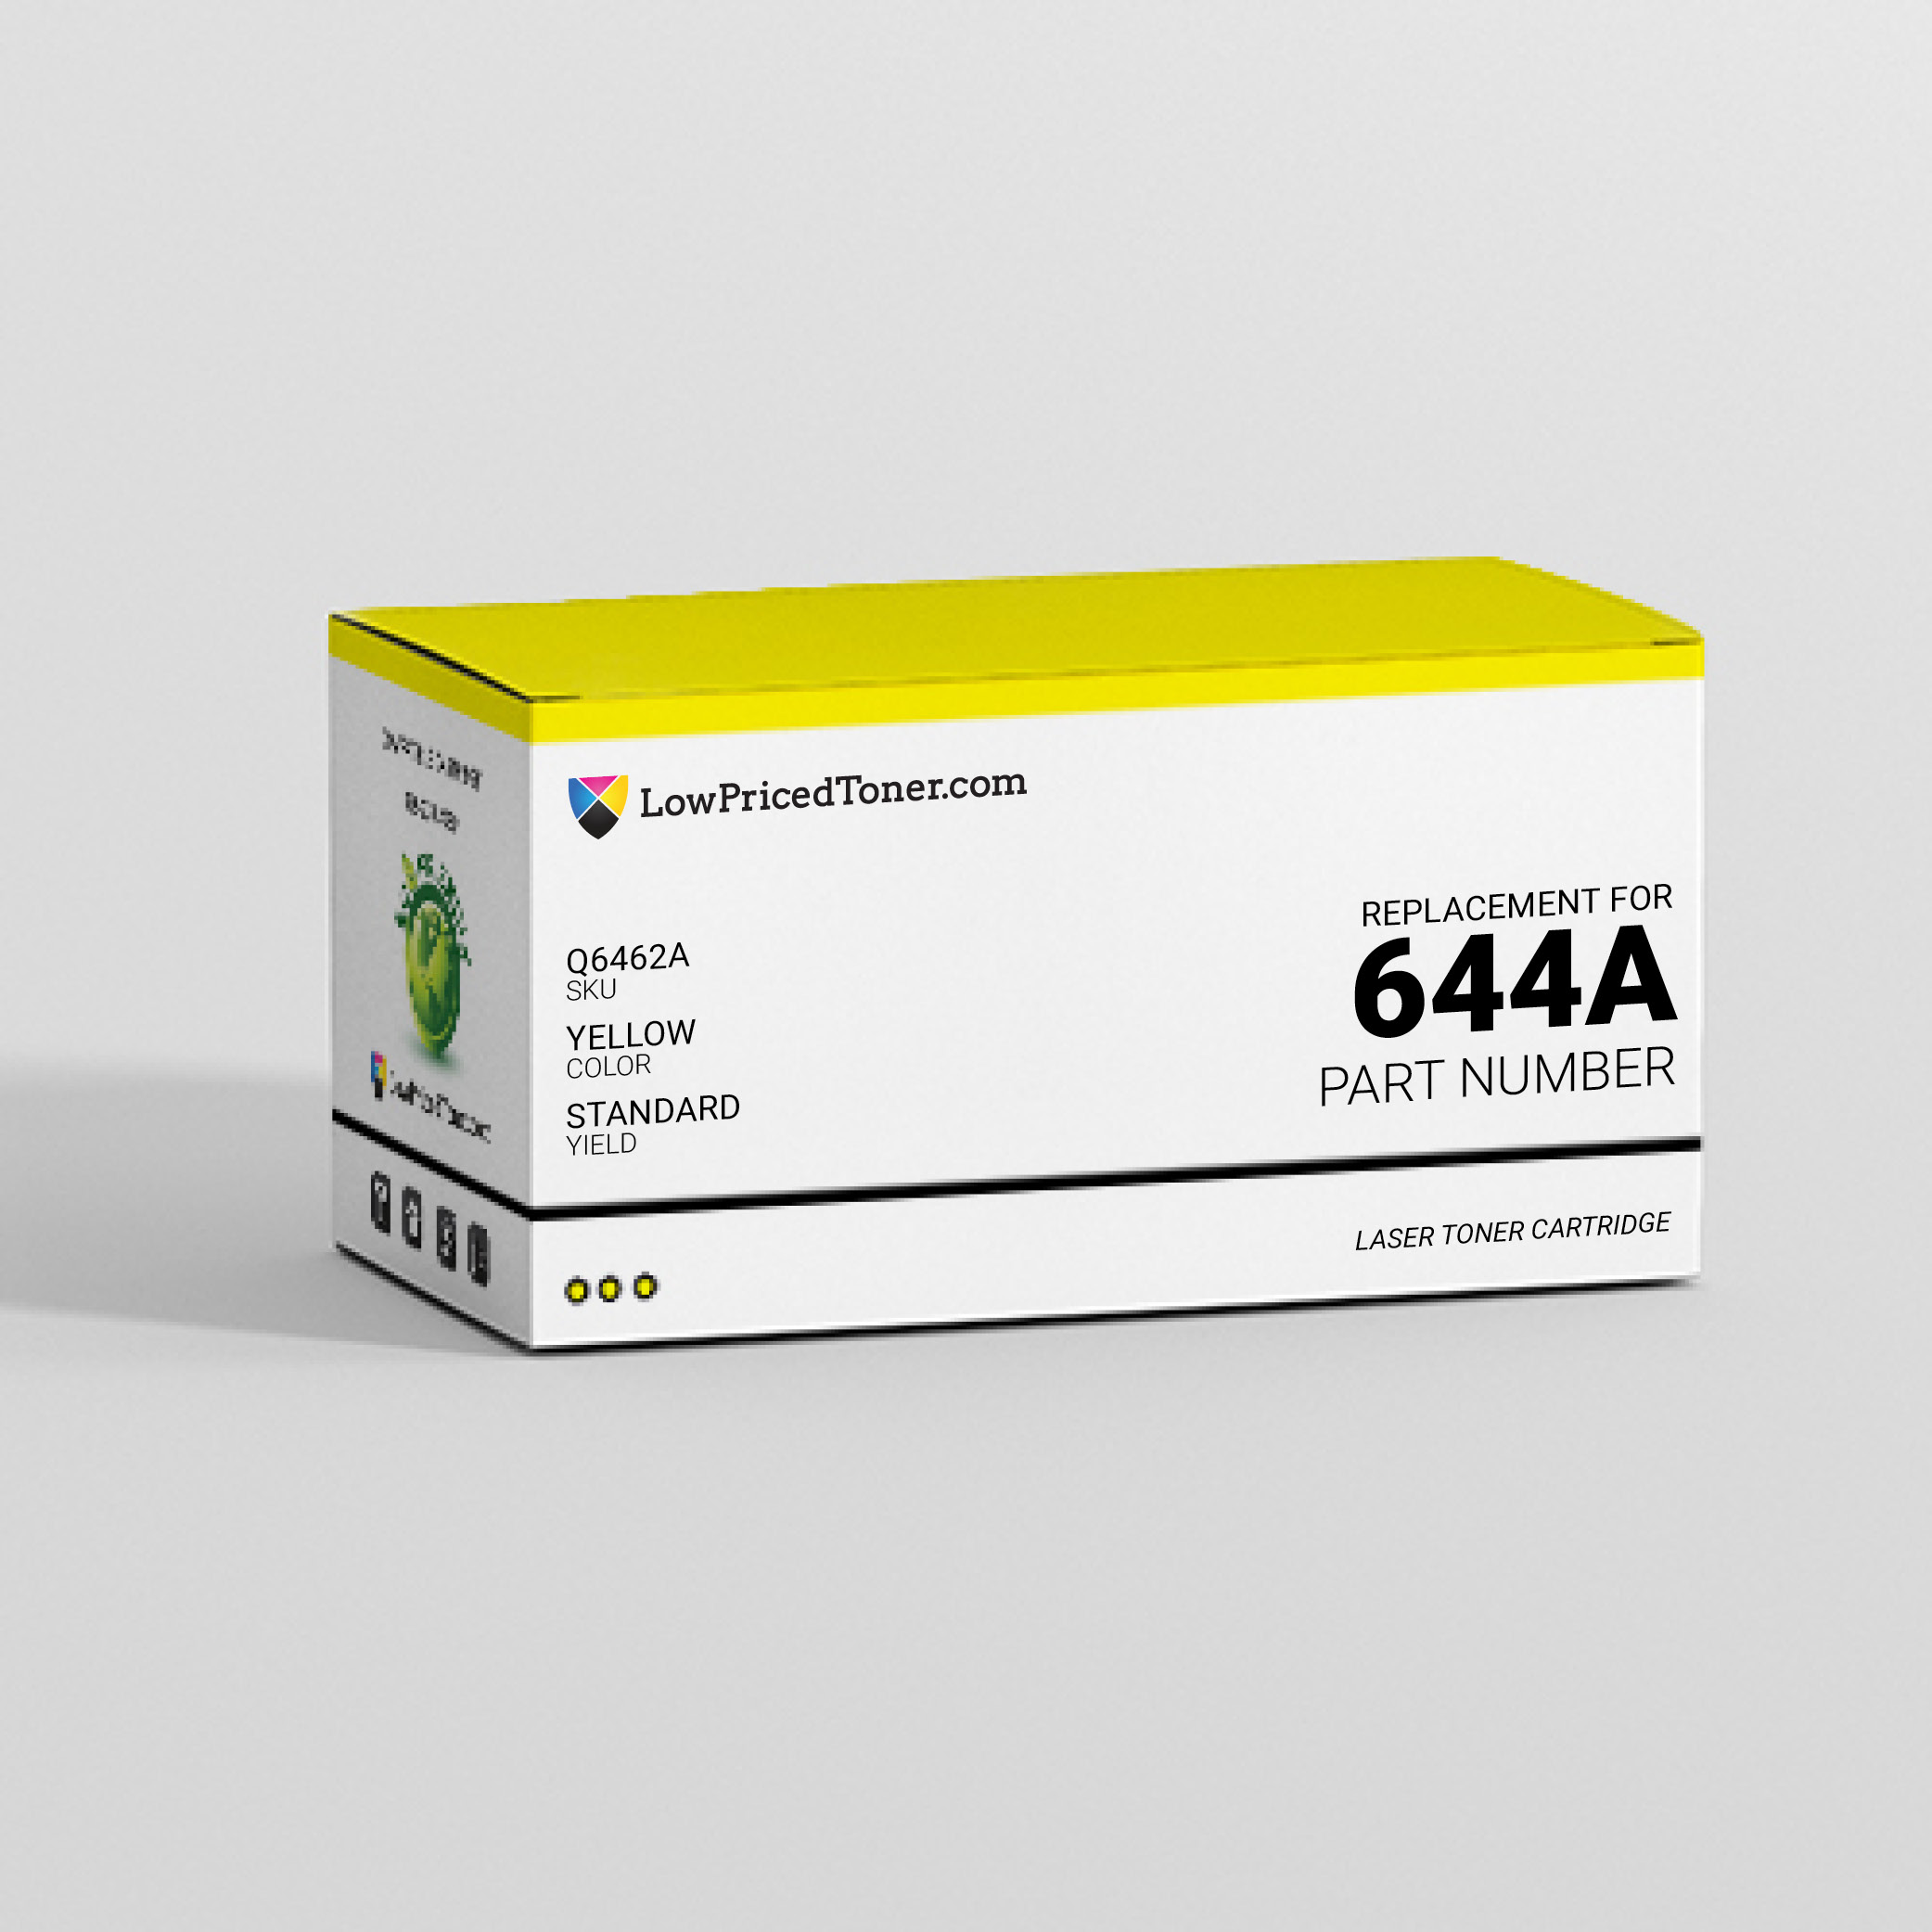 HP Q6462A 644A Remanufactured Yellow Laser Toner Cartridge